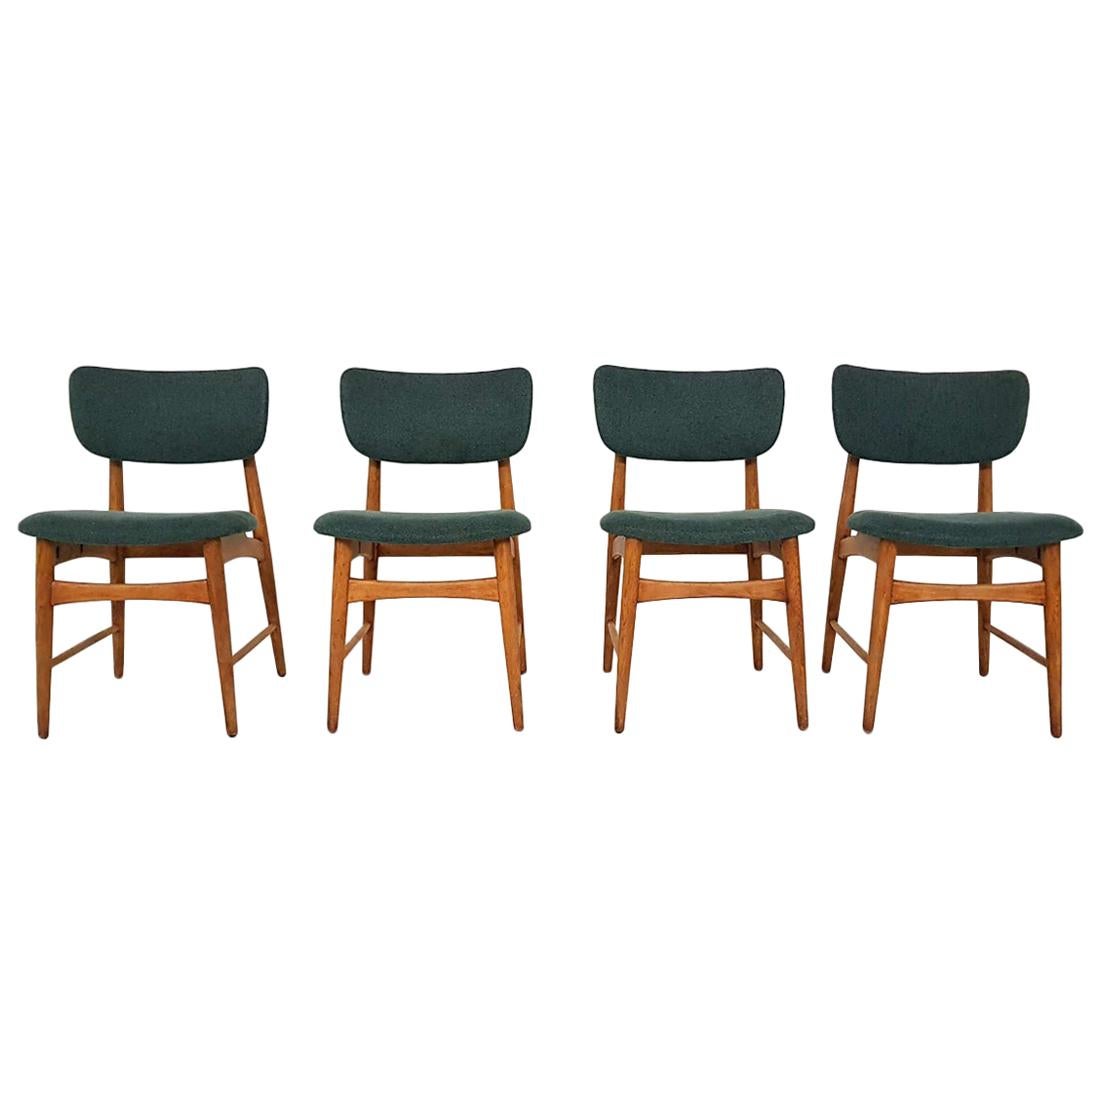 Set of 4 Oak Dining Room Chairs Attributed to Bovenkamp, The Netherlands, 1960s